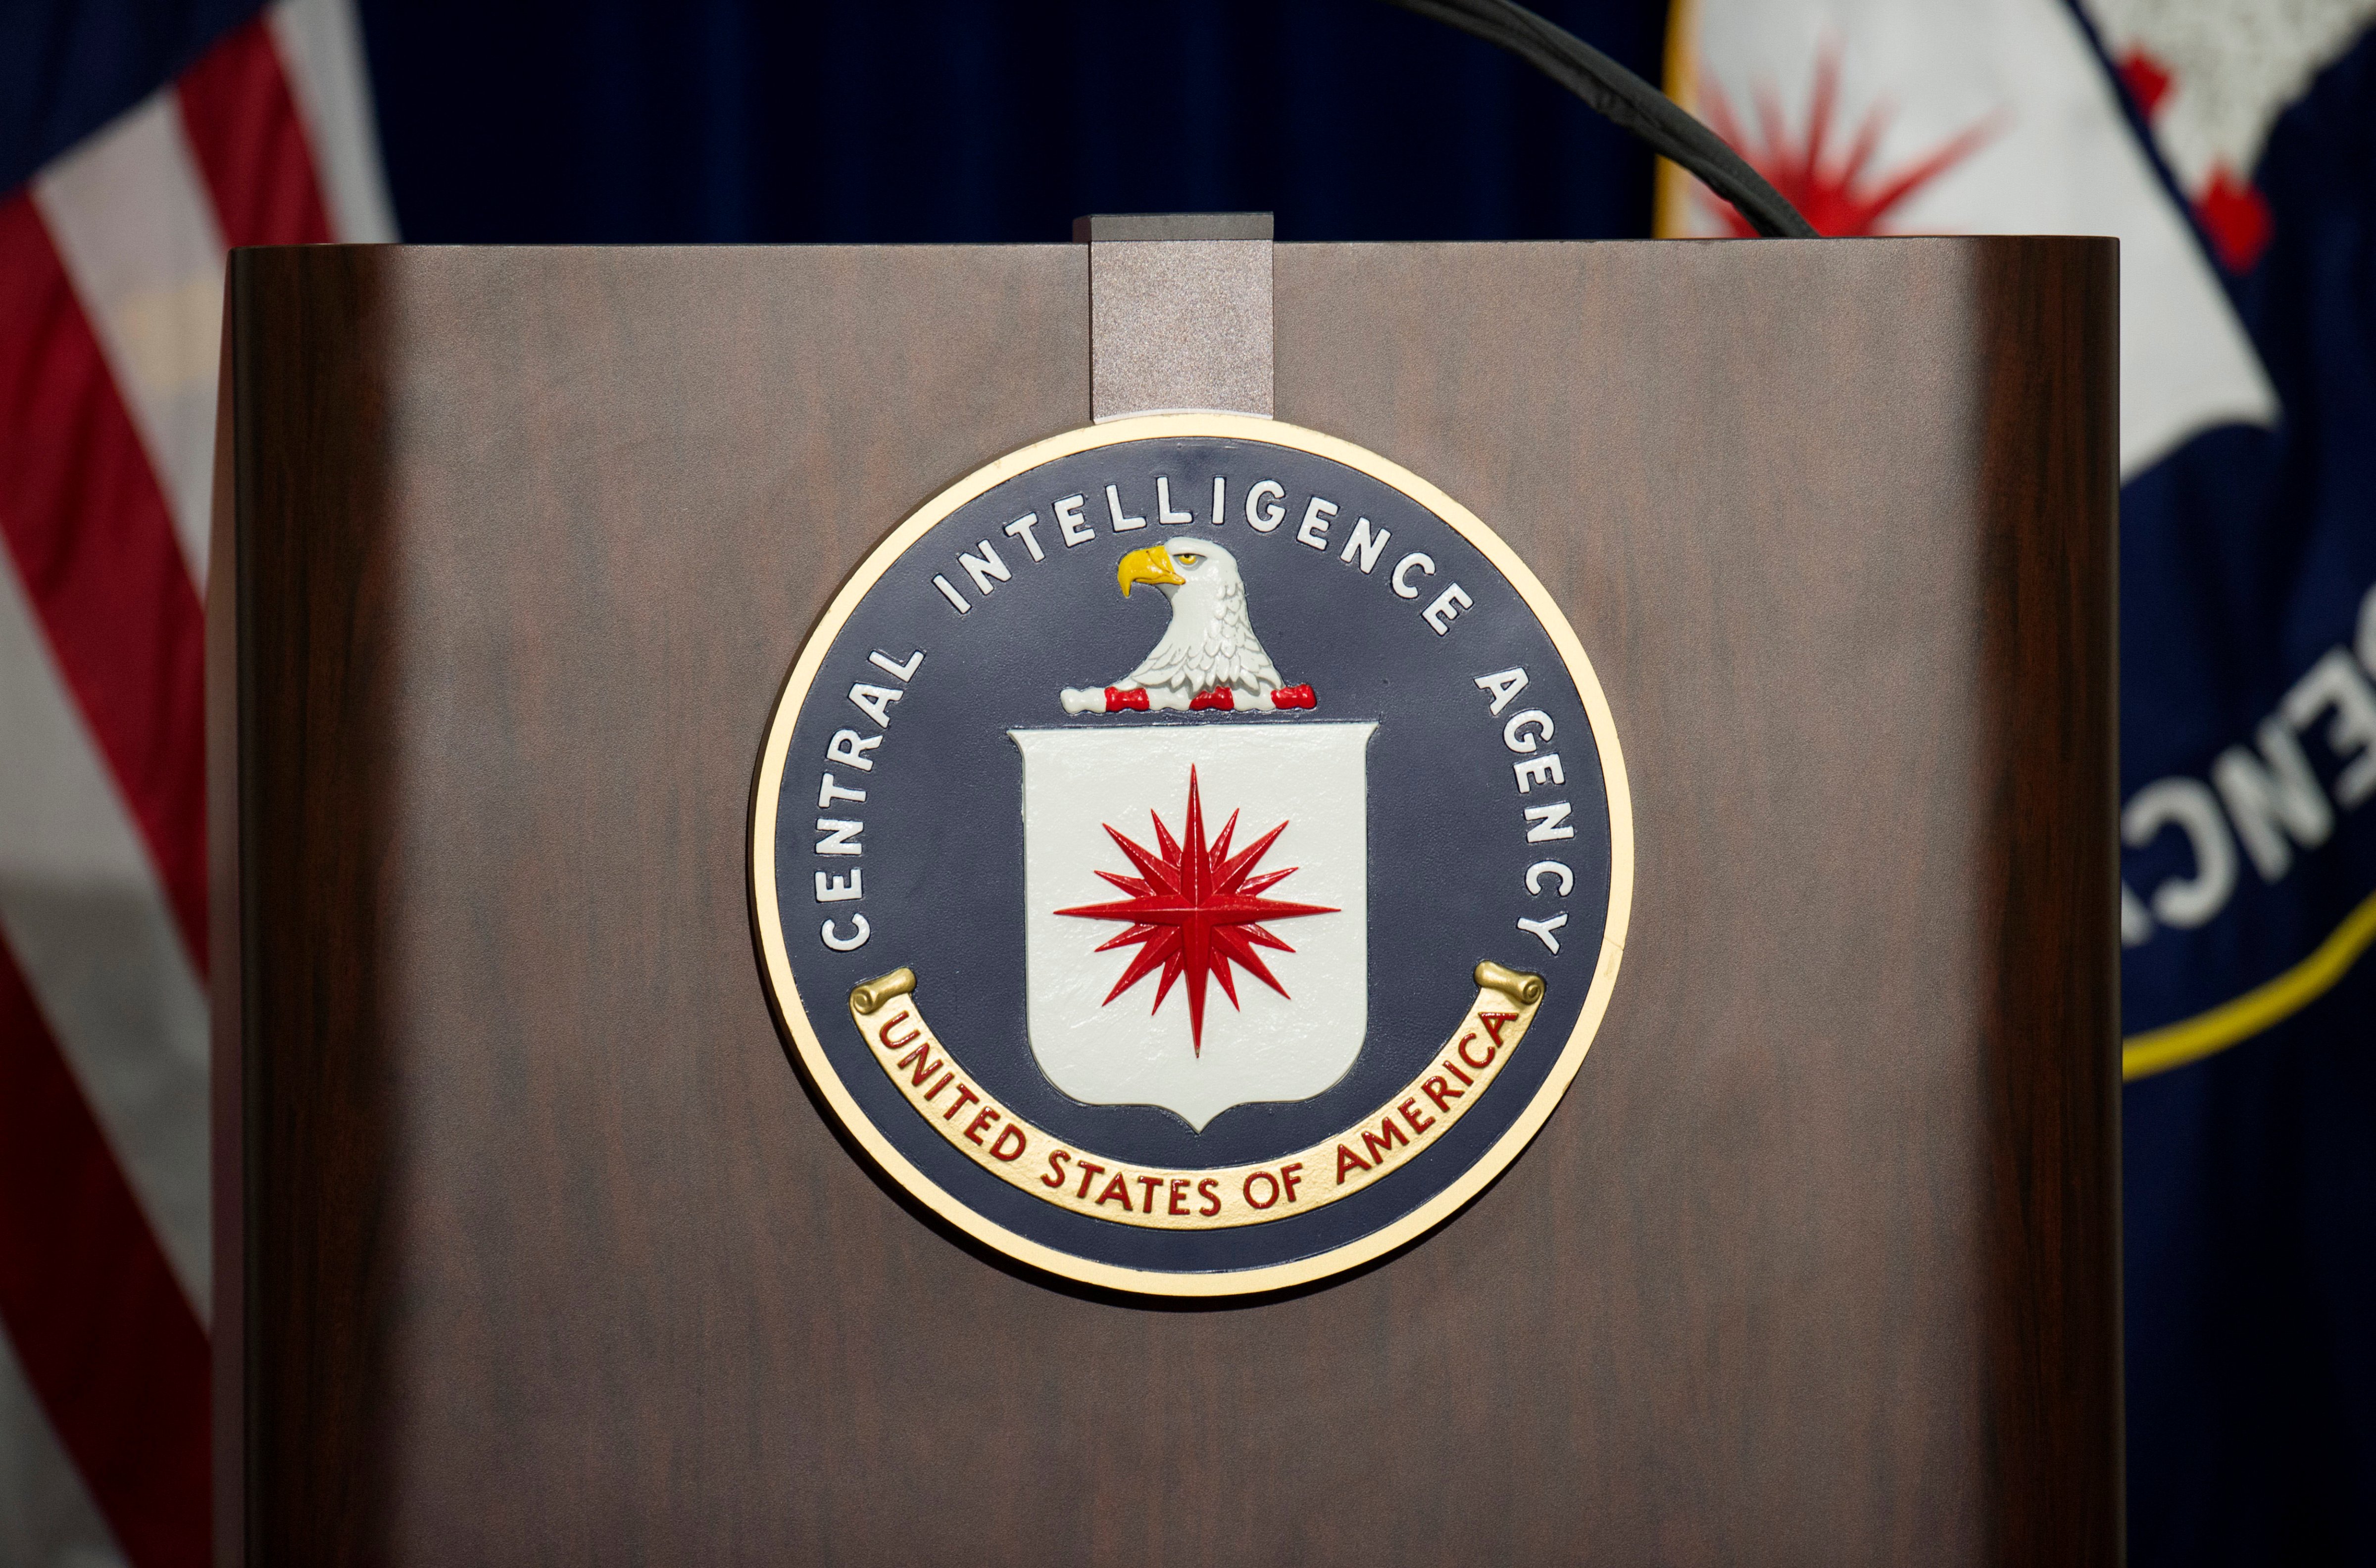 The lectern stands empty as reporters await the arrival of Director of Central Intelligence Agency John Brennan for a press conference at CIA headquarters in Langley, Virginia, December 11, 2014. (Jim Watson—AFP/Getty Images)